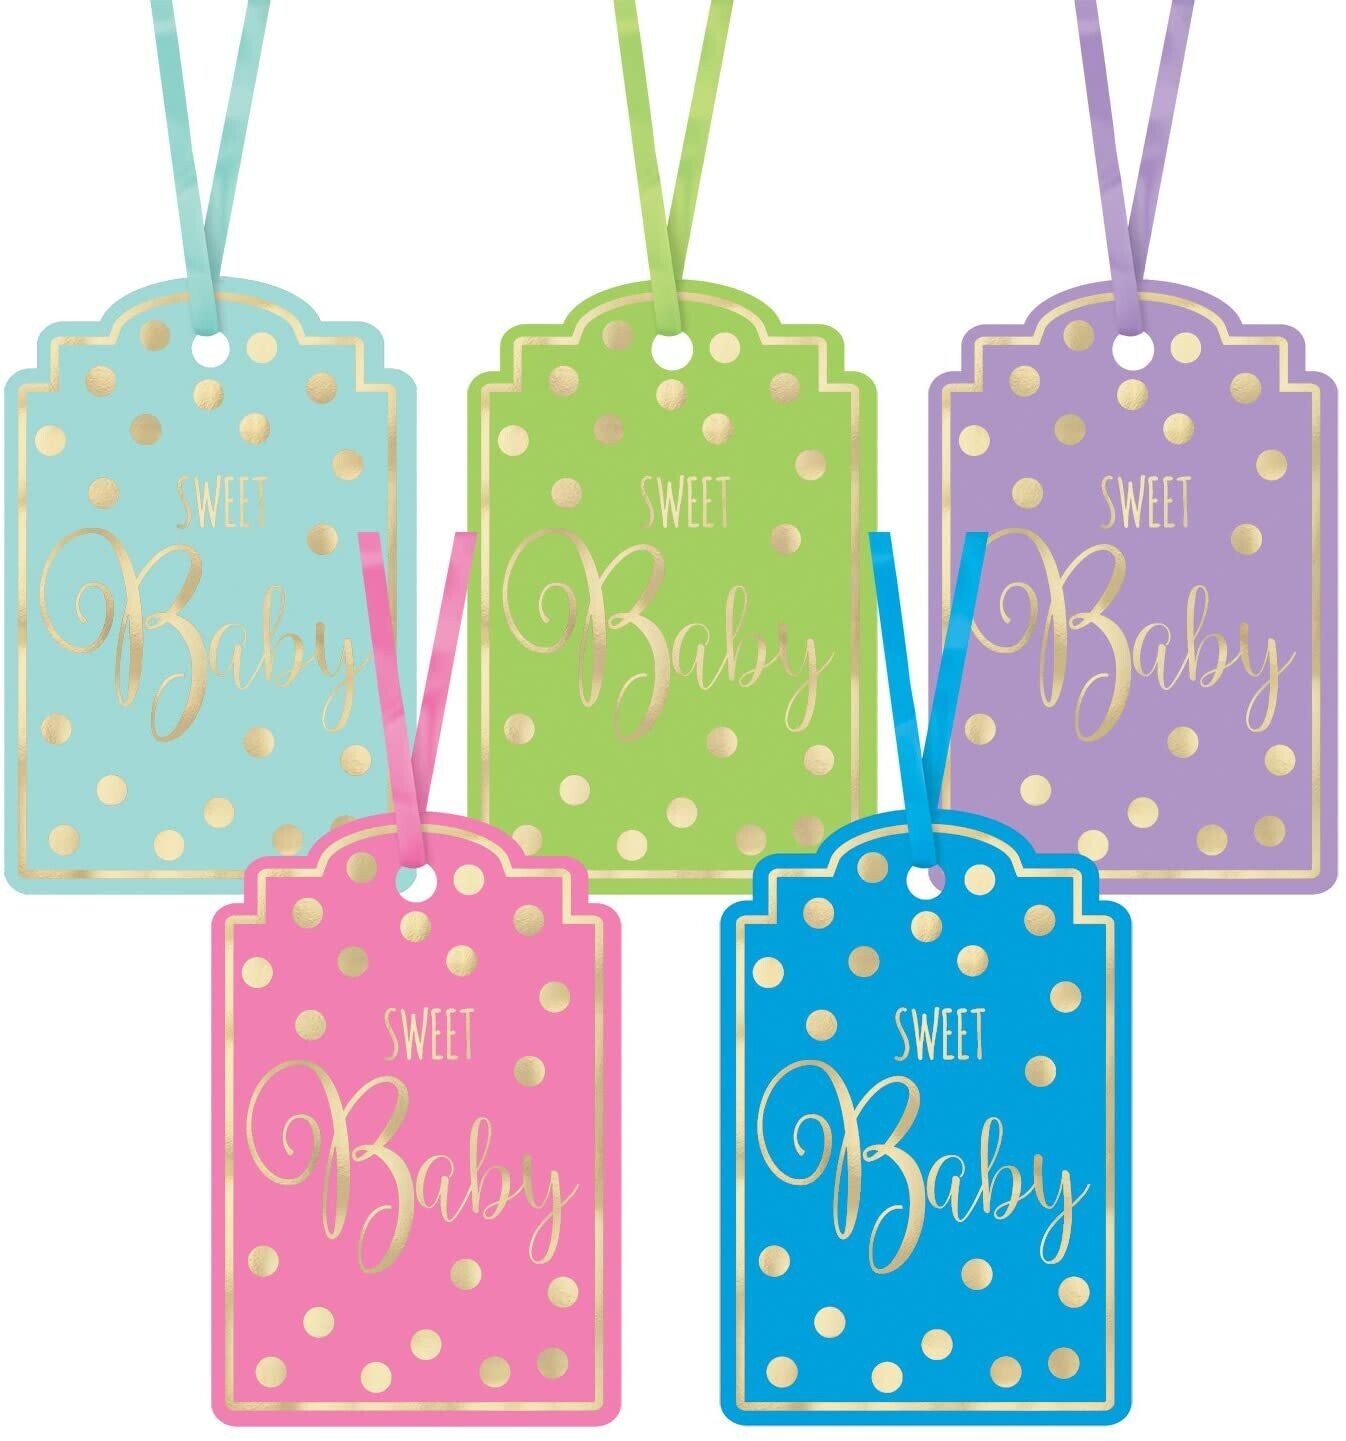 Sweet Baby Tags 25ct